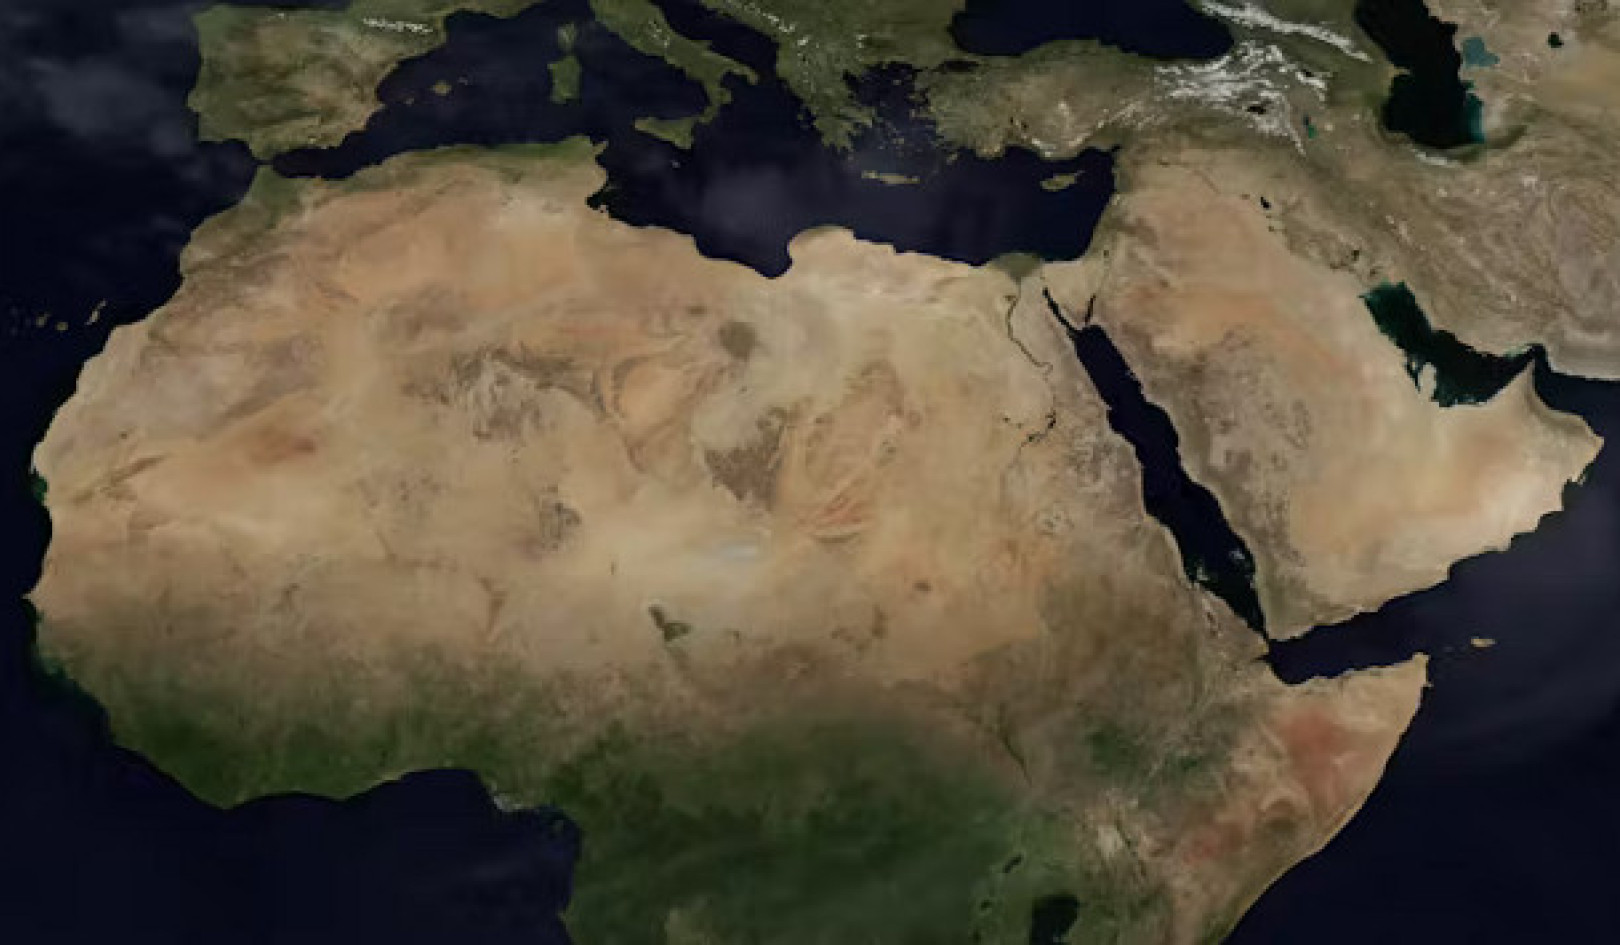 Africa's Climate Tipping Point: Sahara's Drying and Future Impacts